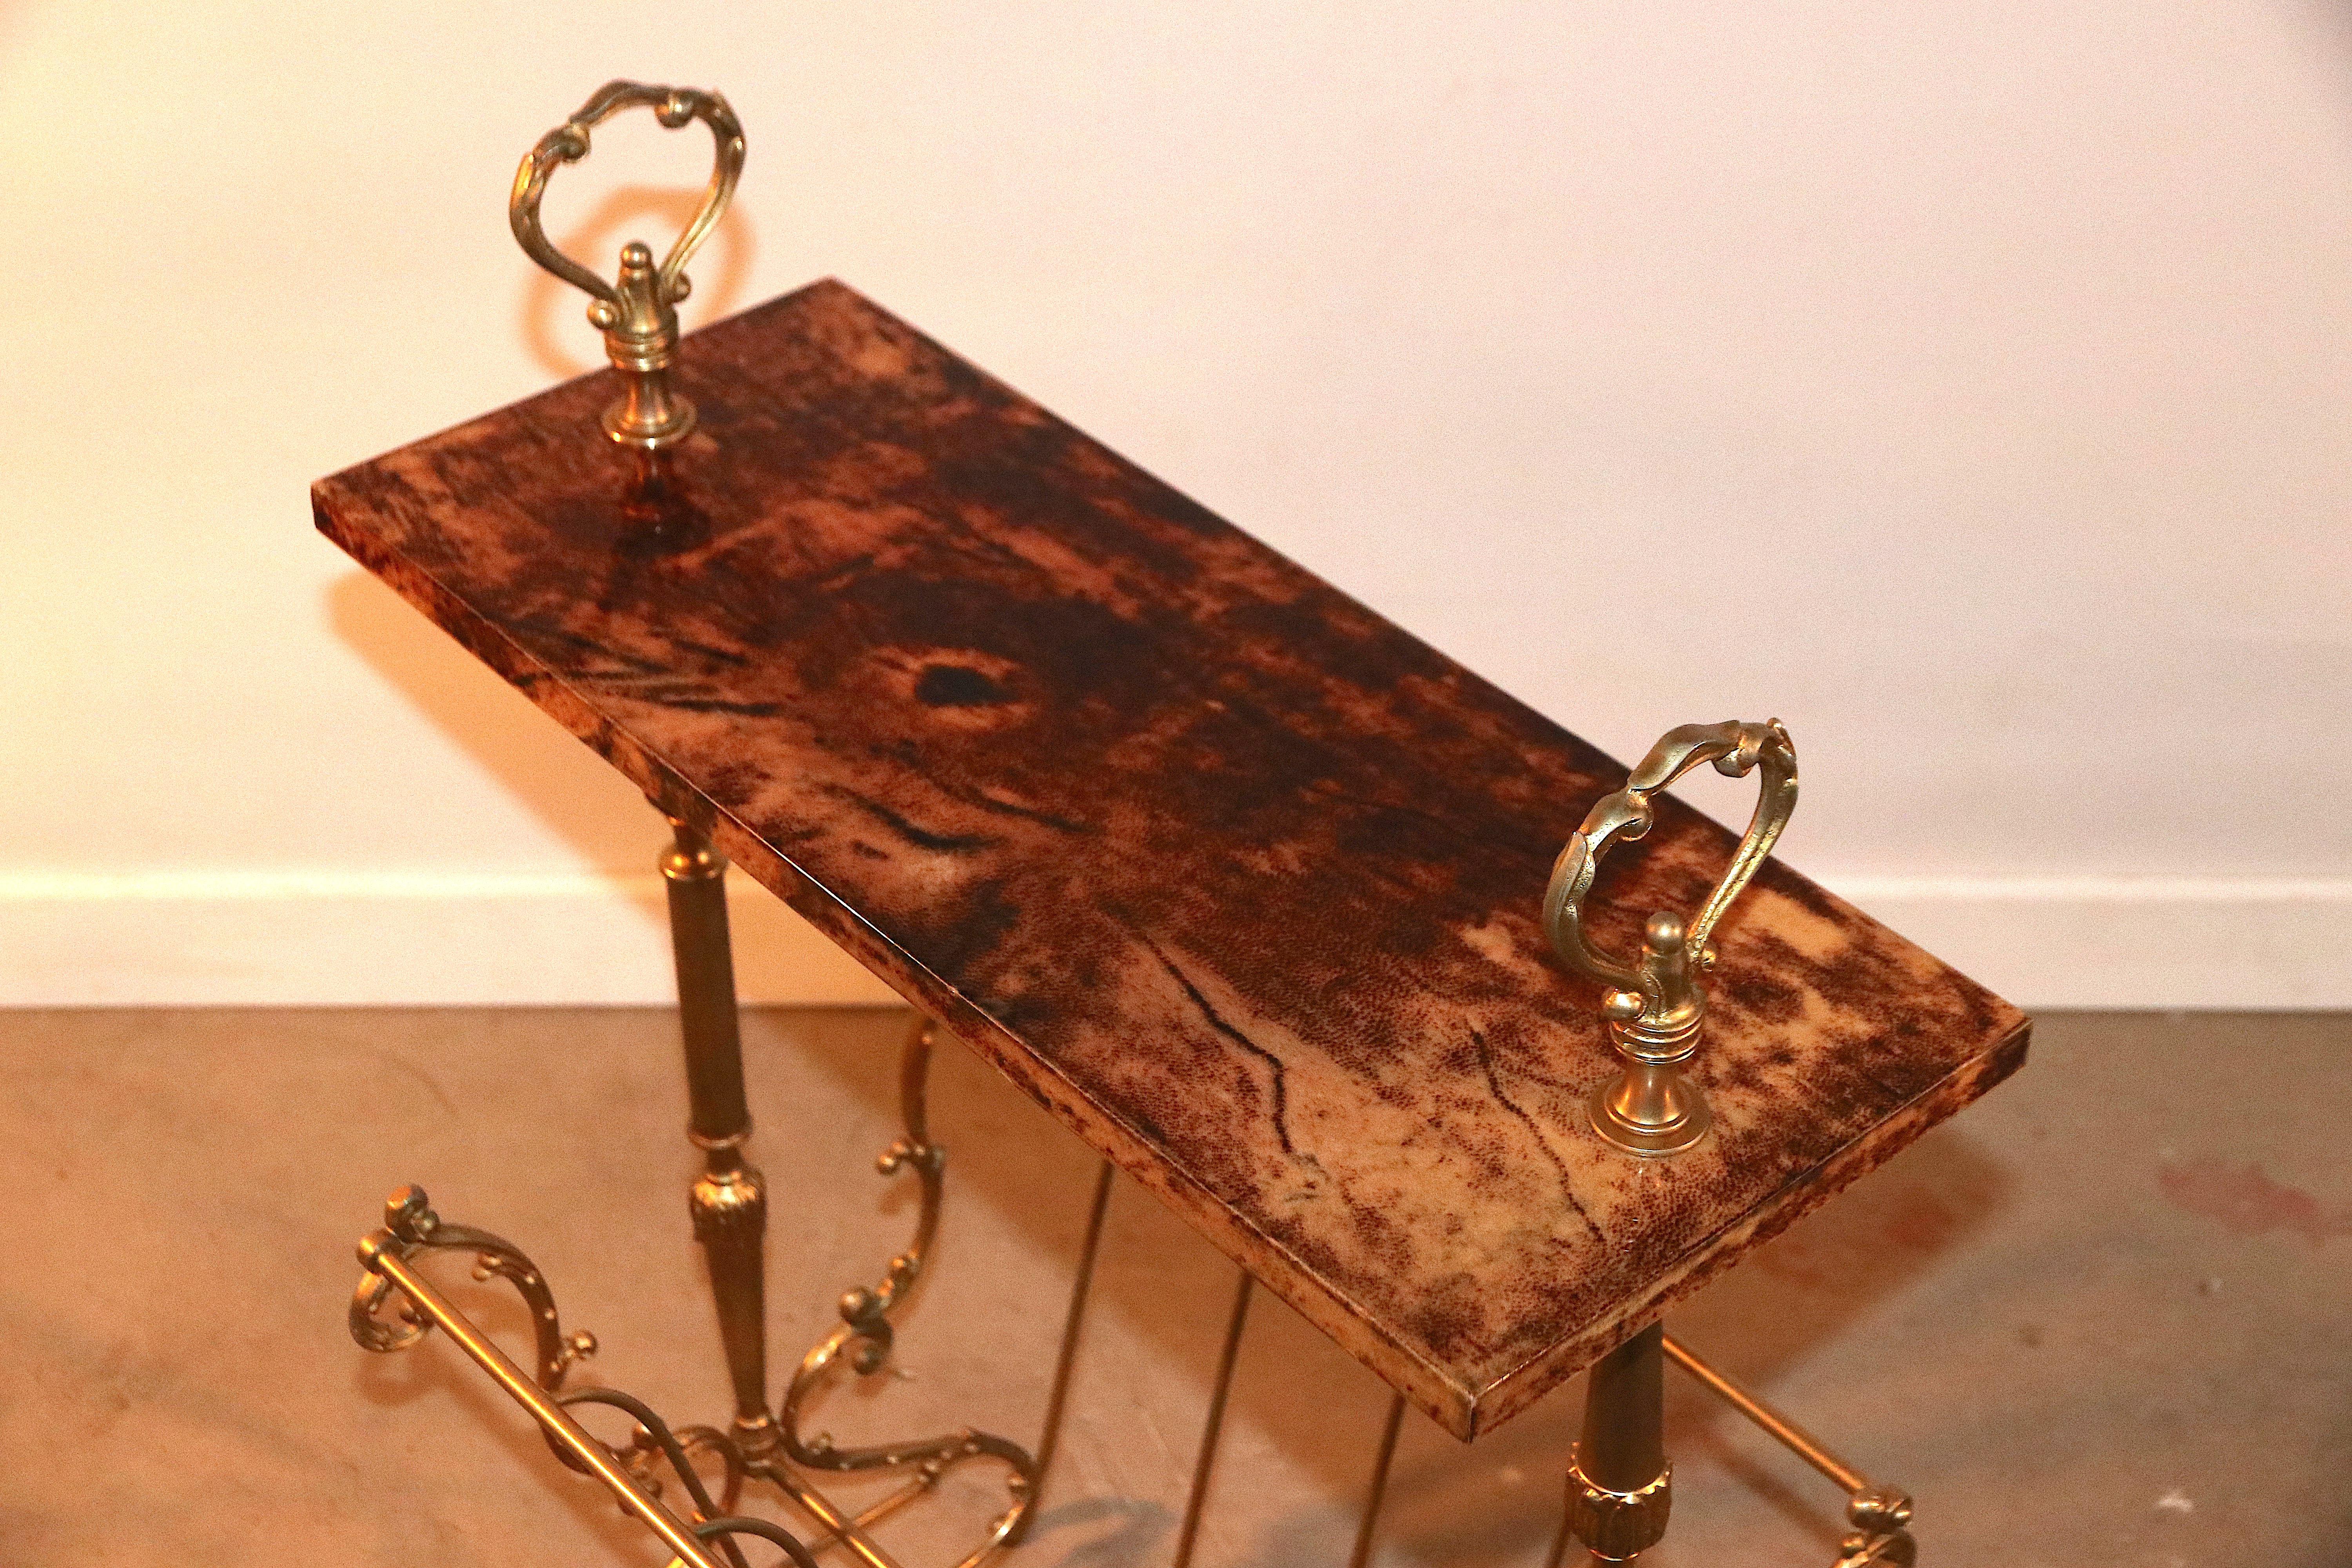 This is a beautiful and rare gold-colored side table and magazine rack designed by Aldo Tura. The piece is covered with Tura's signature material 